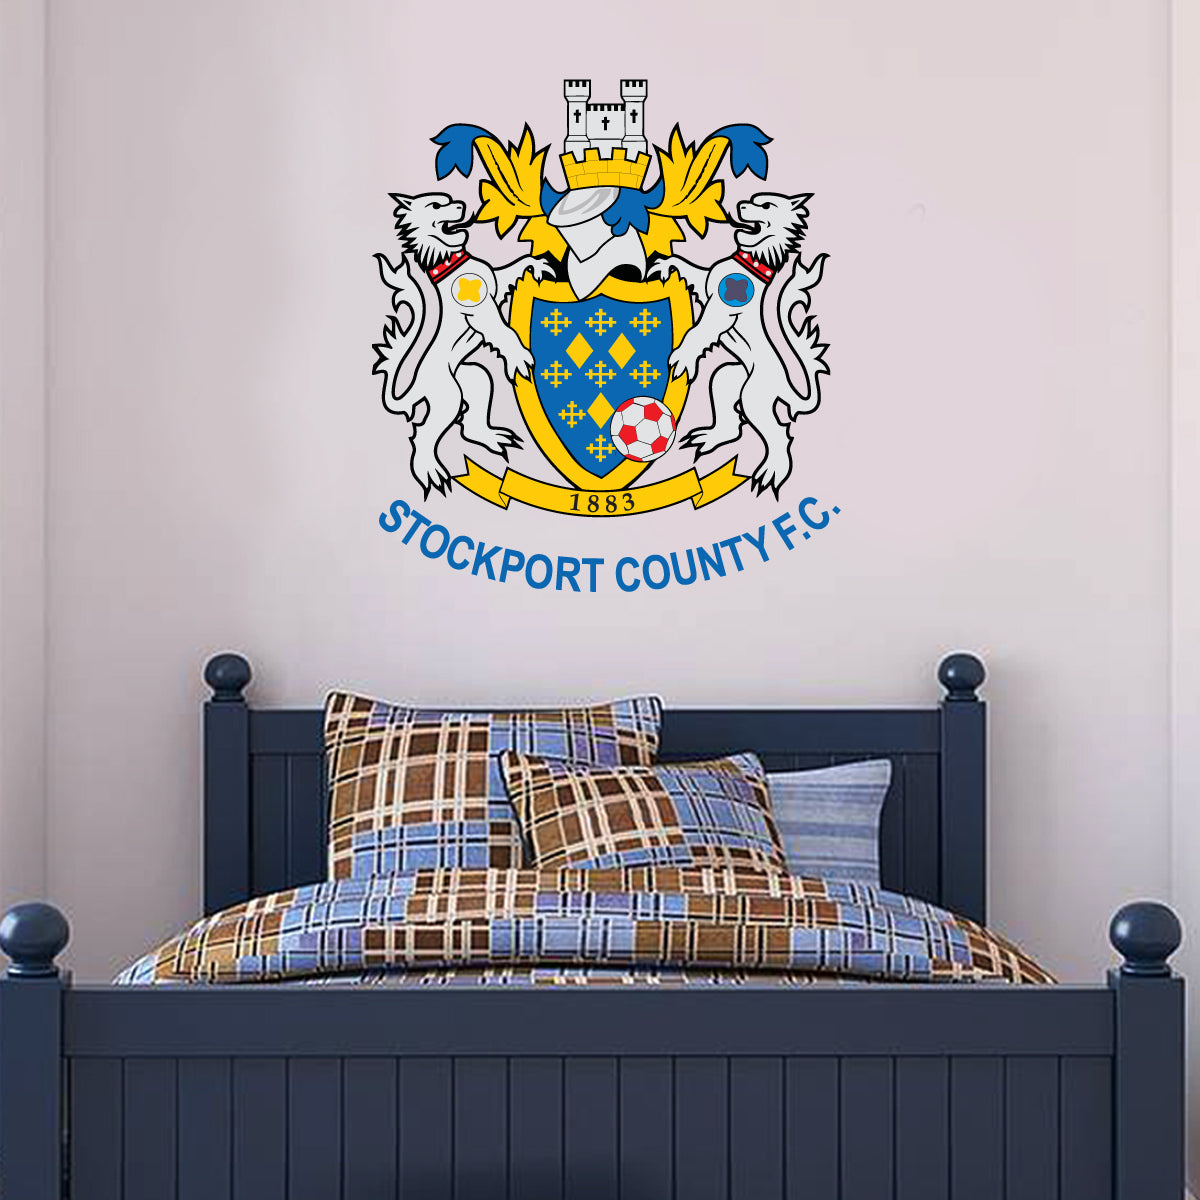 Stockport County Official Crest Wall Sticker